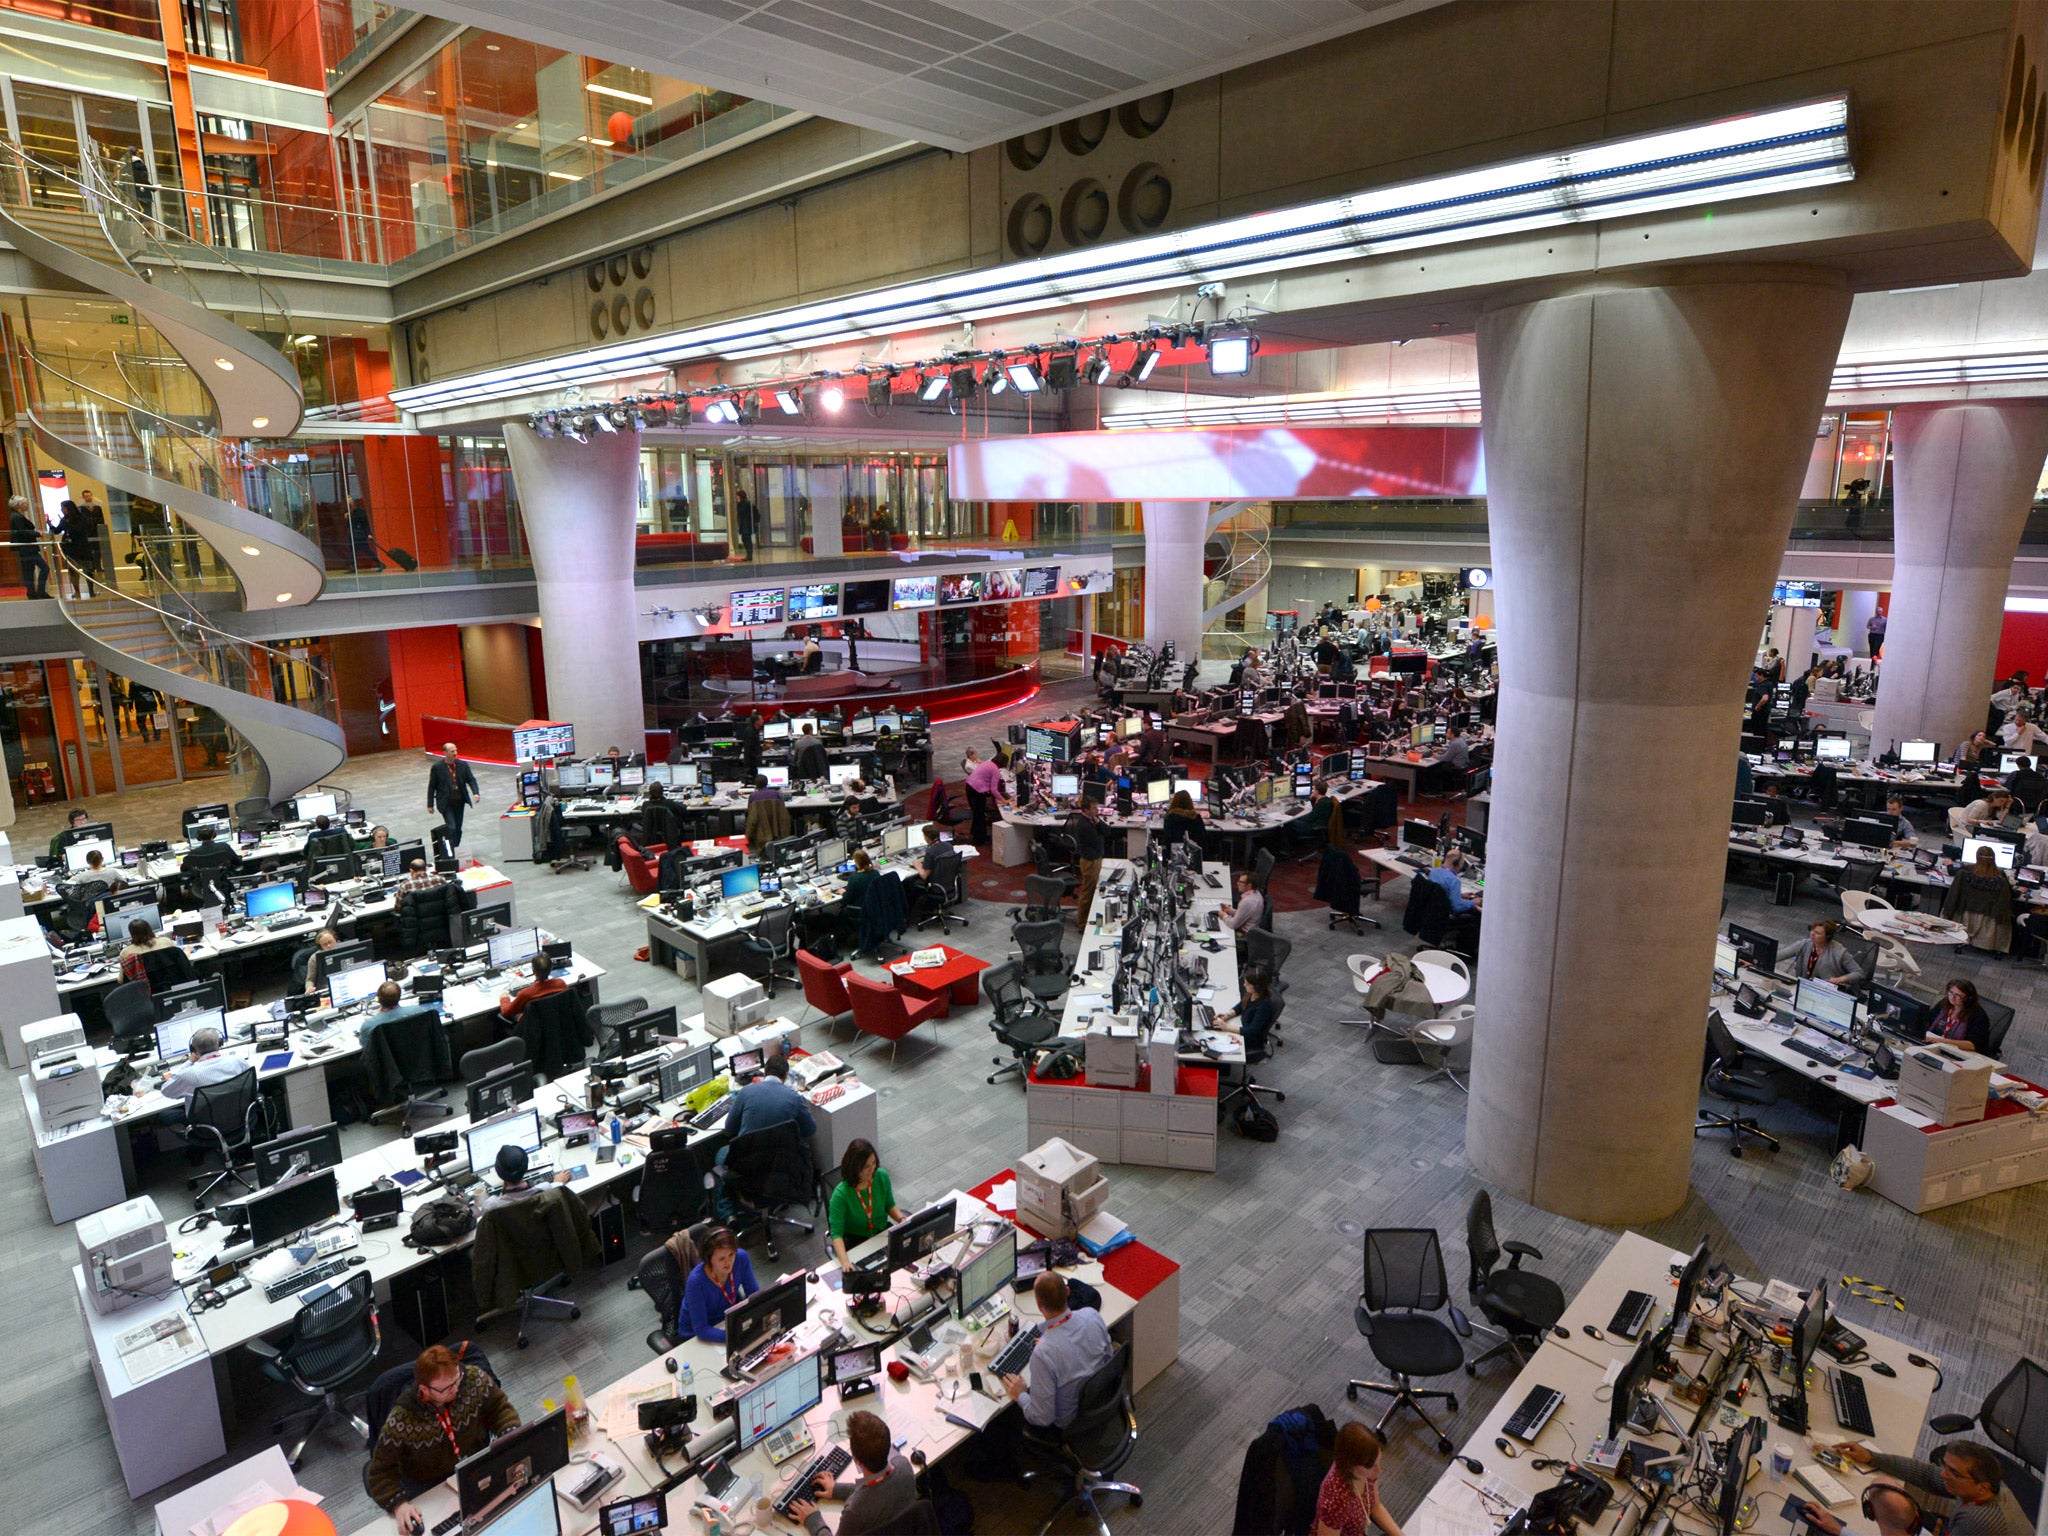 The BBC News room at Broadcasting House - but is it really right of centre?